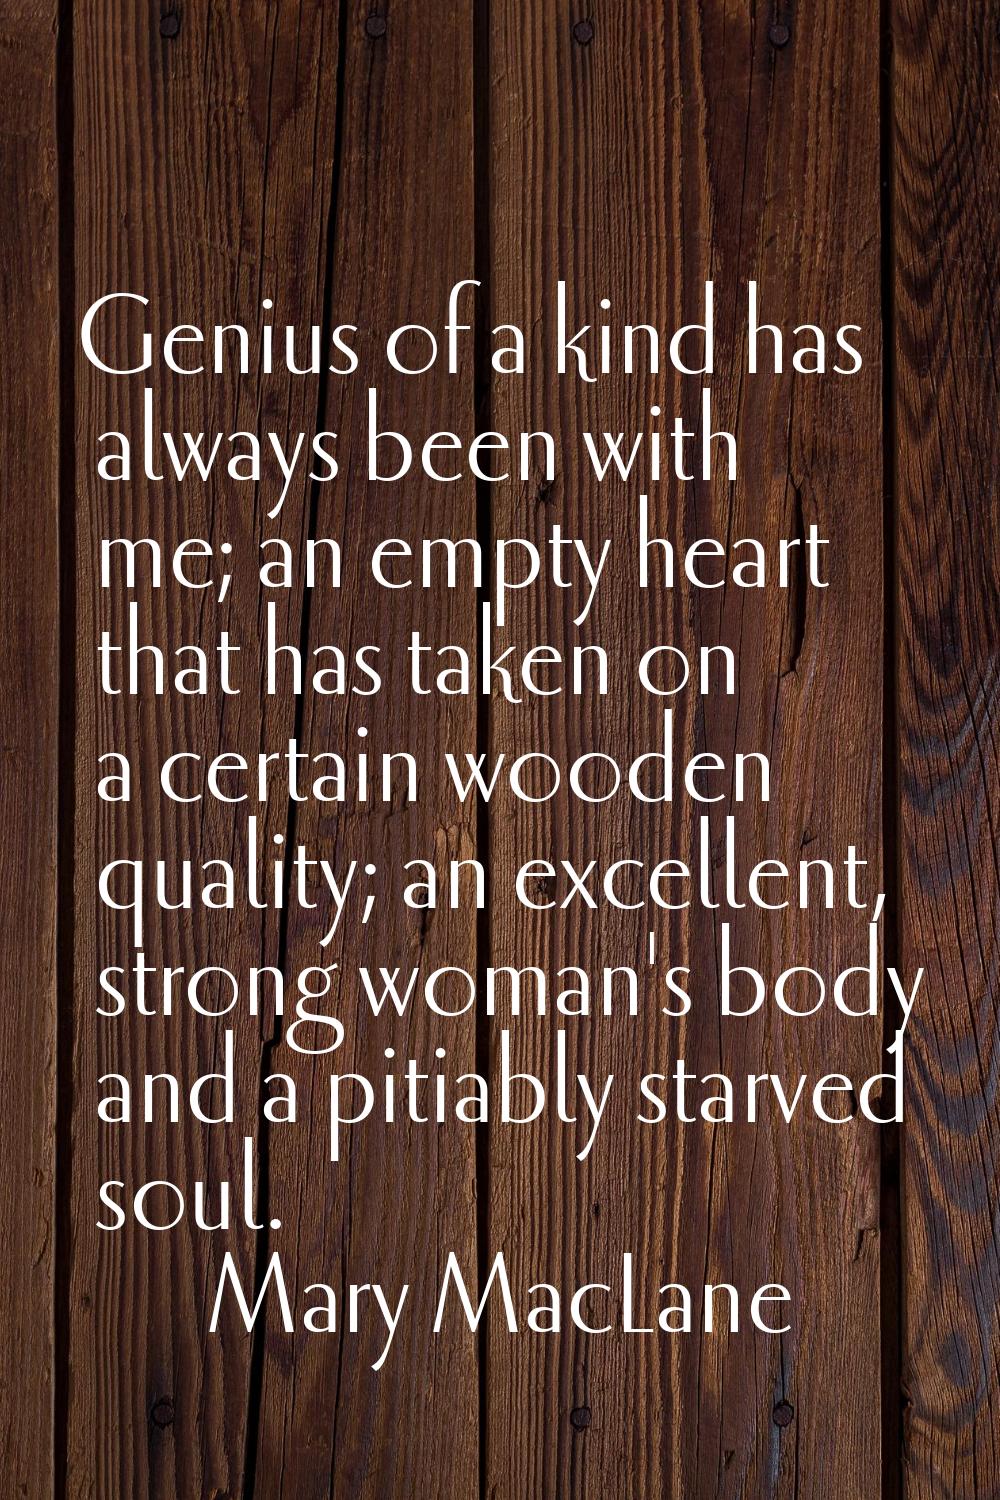 Genius of a kind has always been with me; an empty heart that has taken on a certain wooden quality